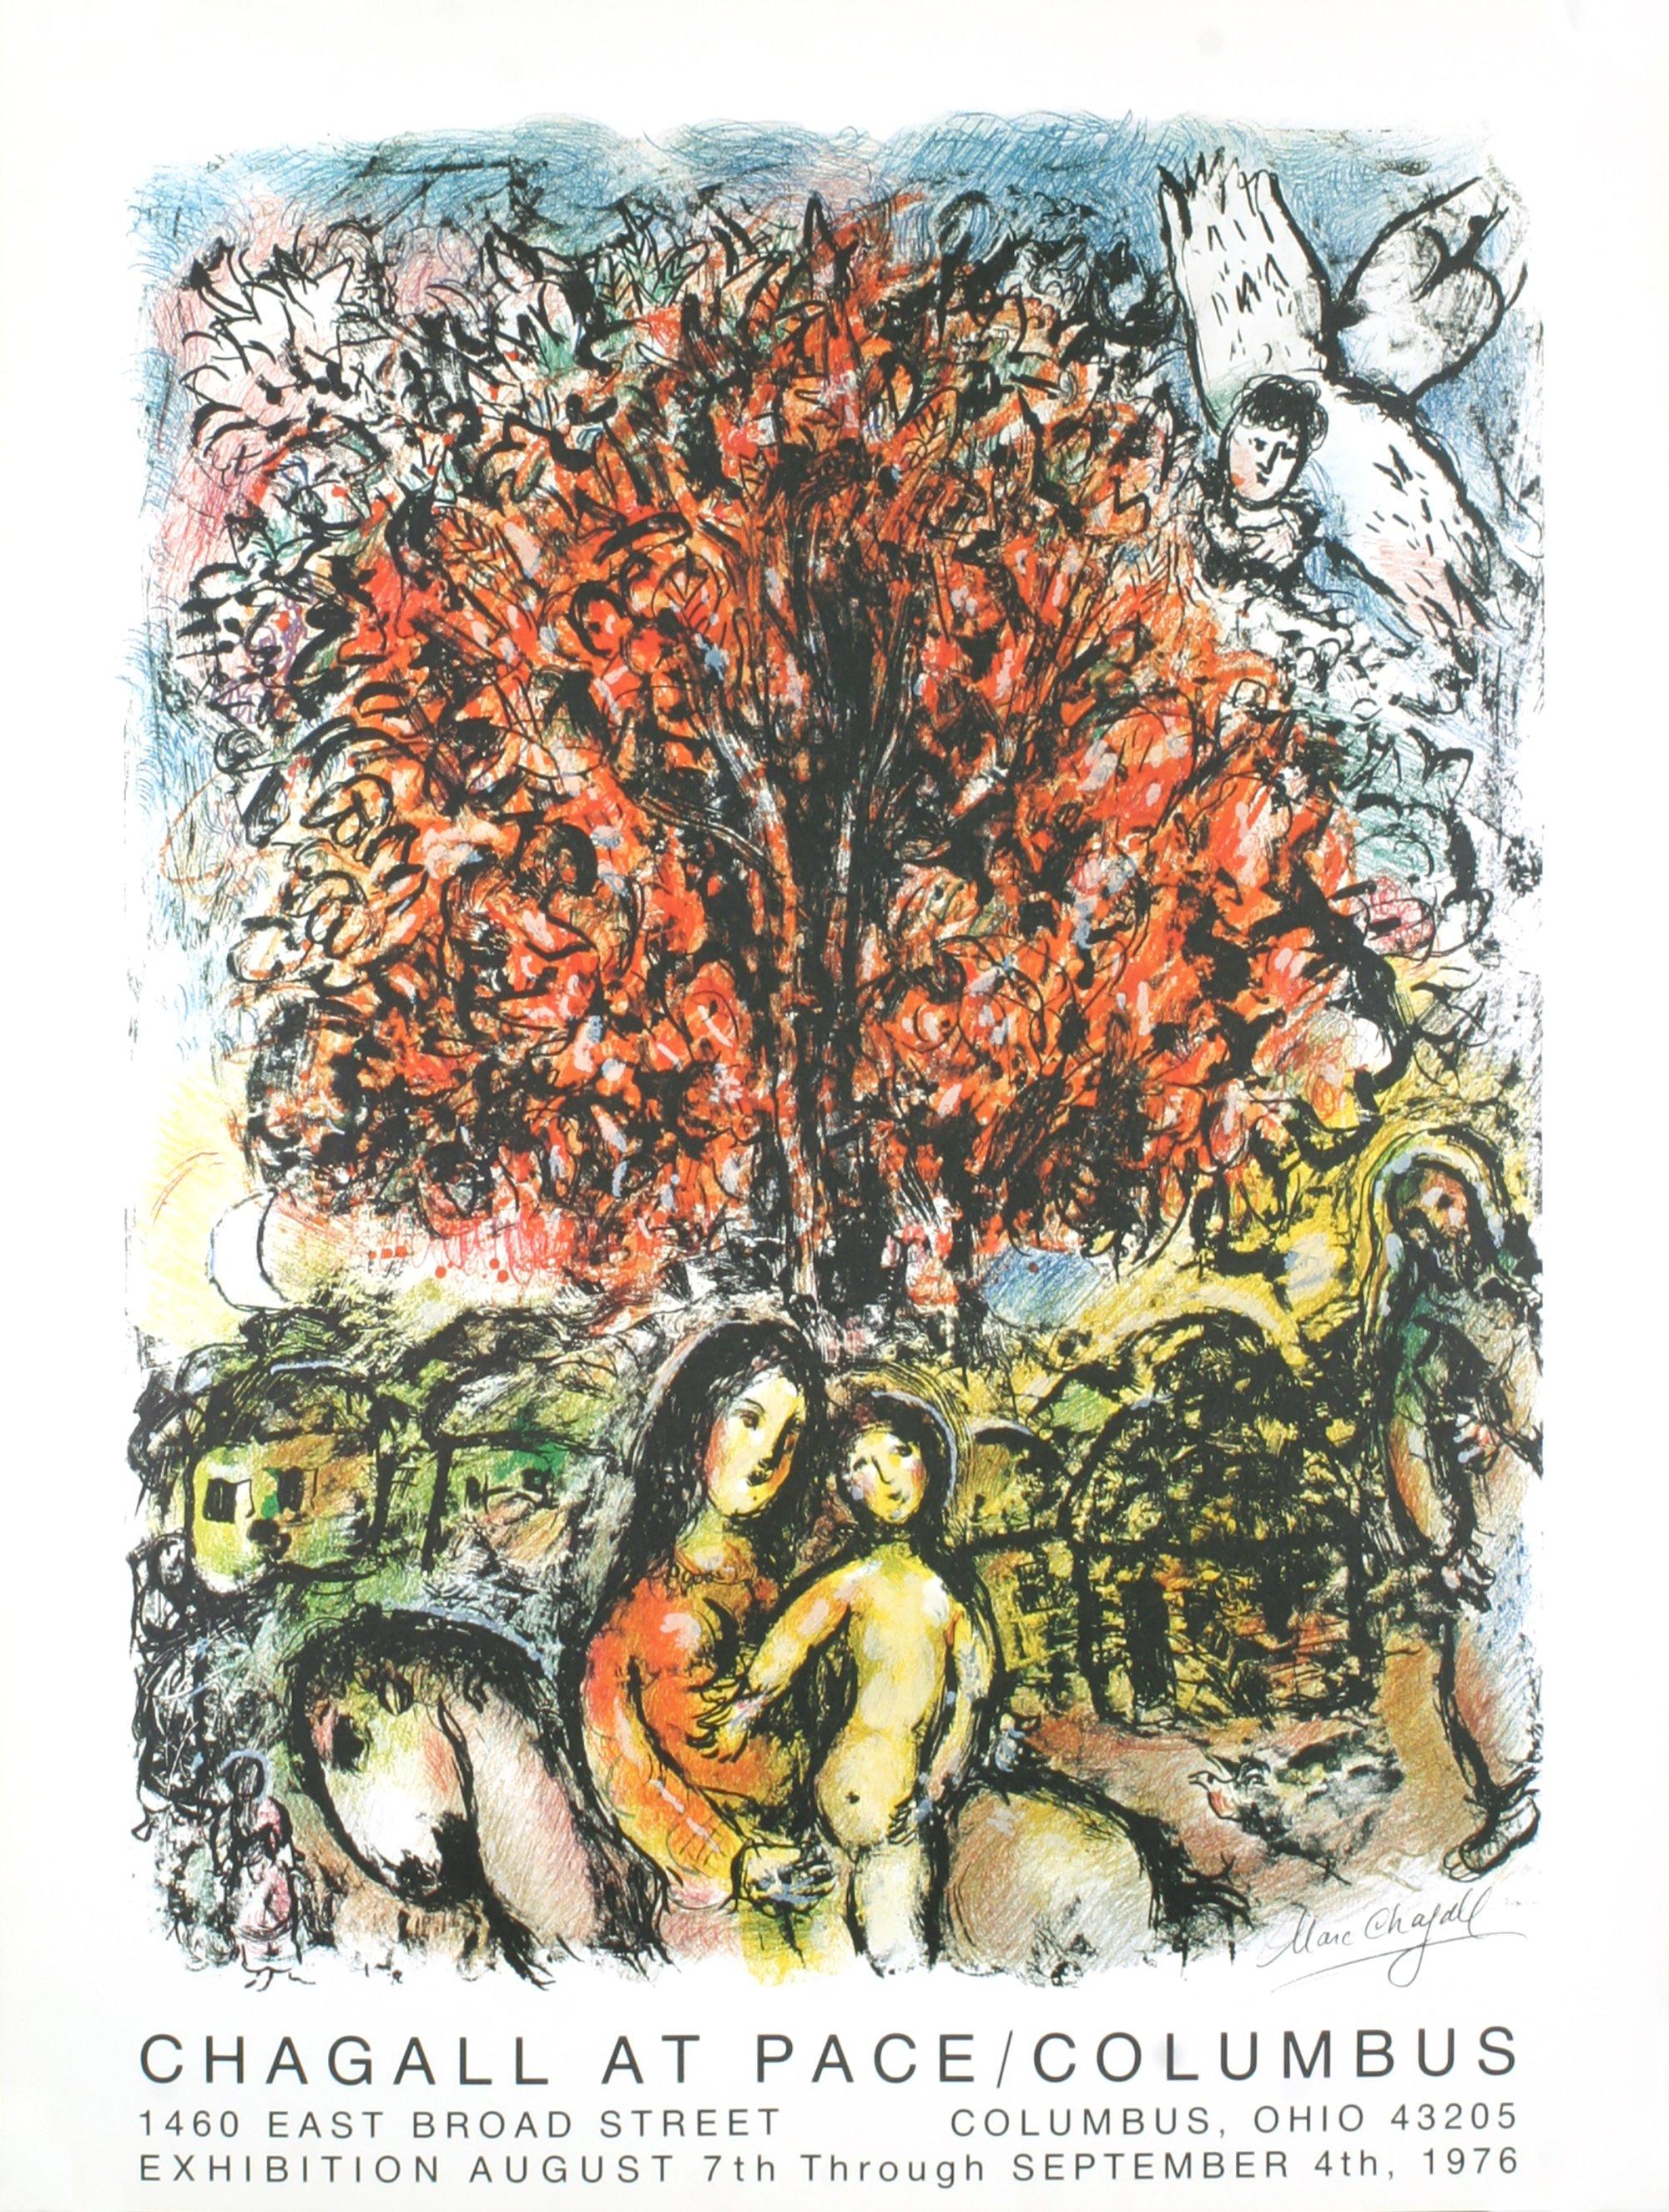 Paper Size: 32 x 24 inches ( 81.28 x 60.96 cm )
 Image Size: 27 x 20.5 inches ( 68.58 x 52.07 cm )
 Framed: No
 Condition: B: Very Good Condition, with signs of handling or age
 
 Additional Details: Limited edition print by Marc Chagall titled "La